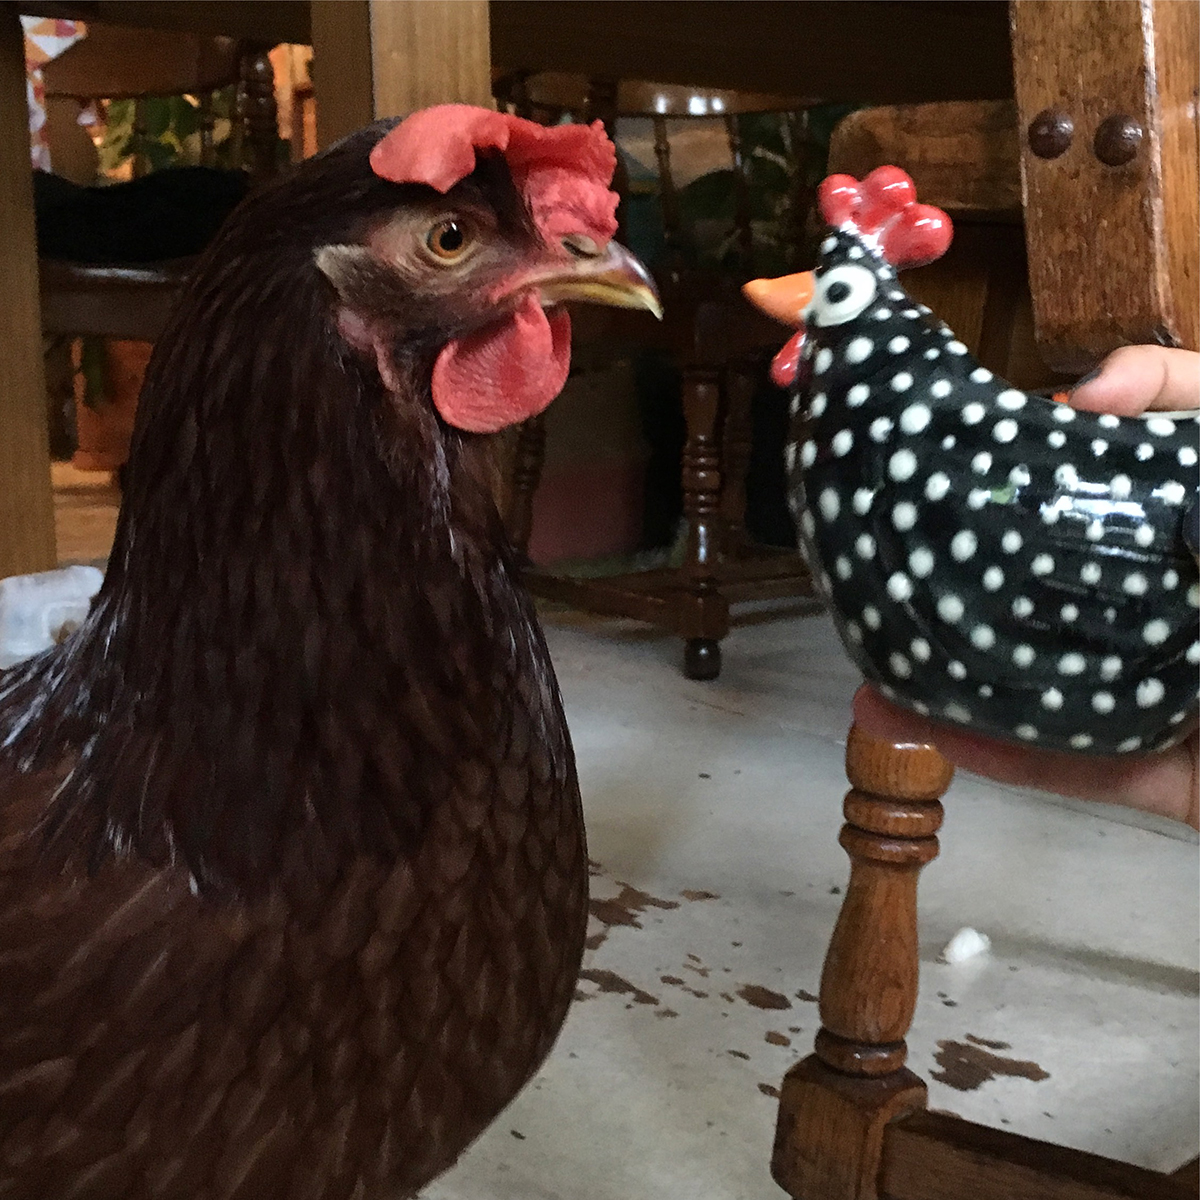 Here, I got a new chicken planter and you can tell she didn’t take... 